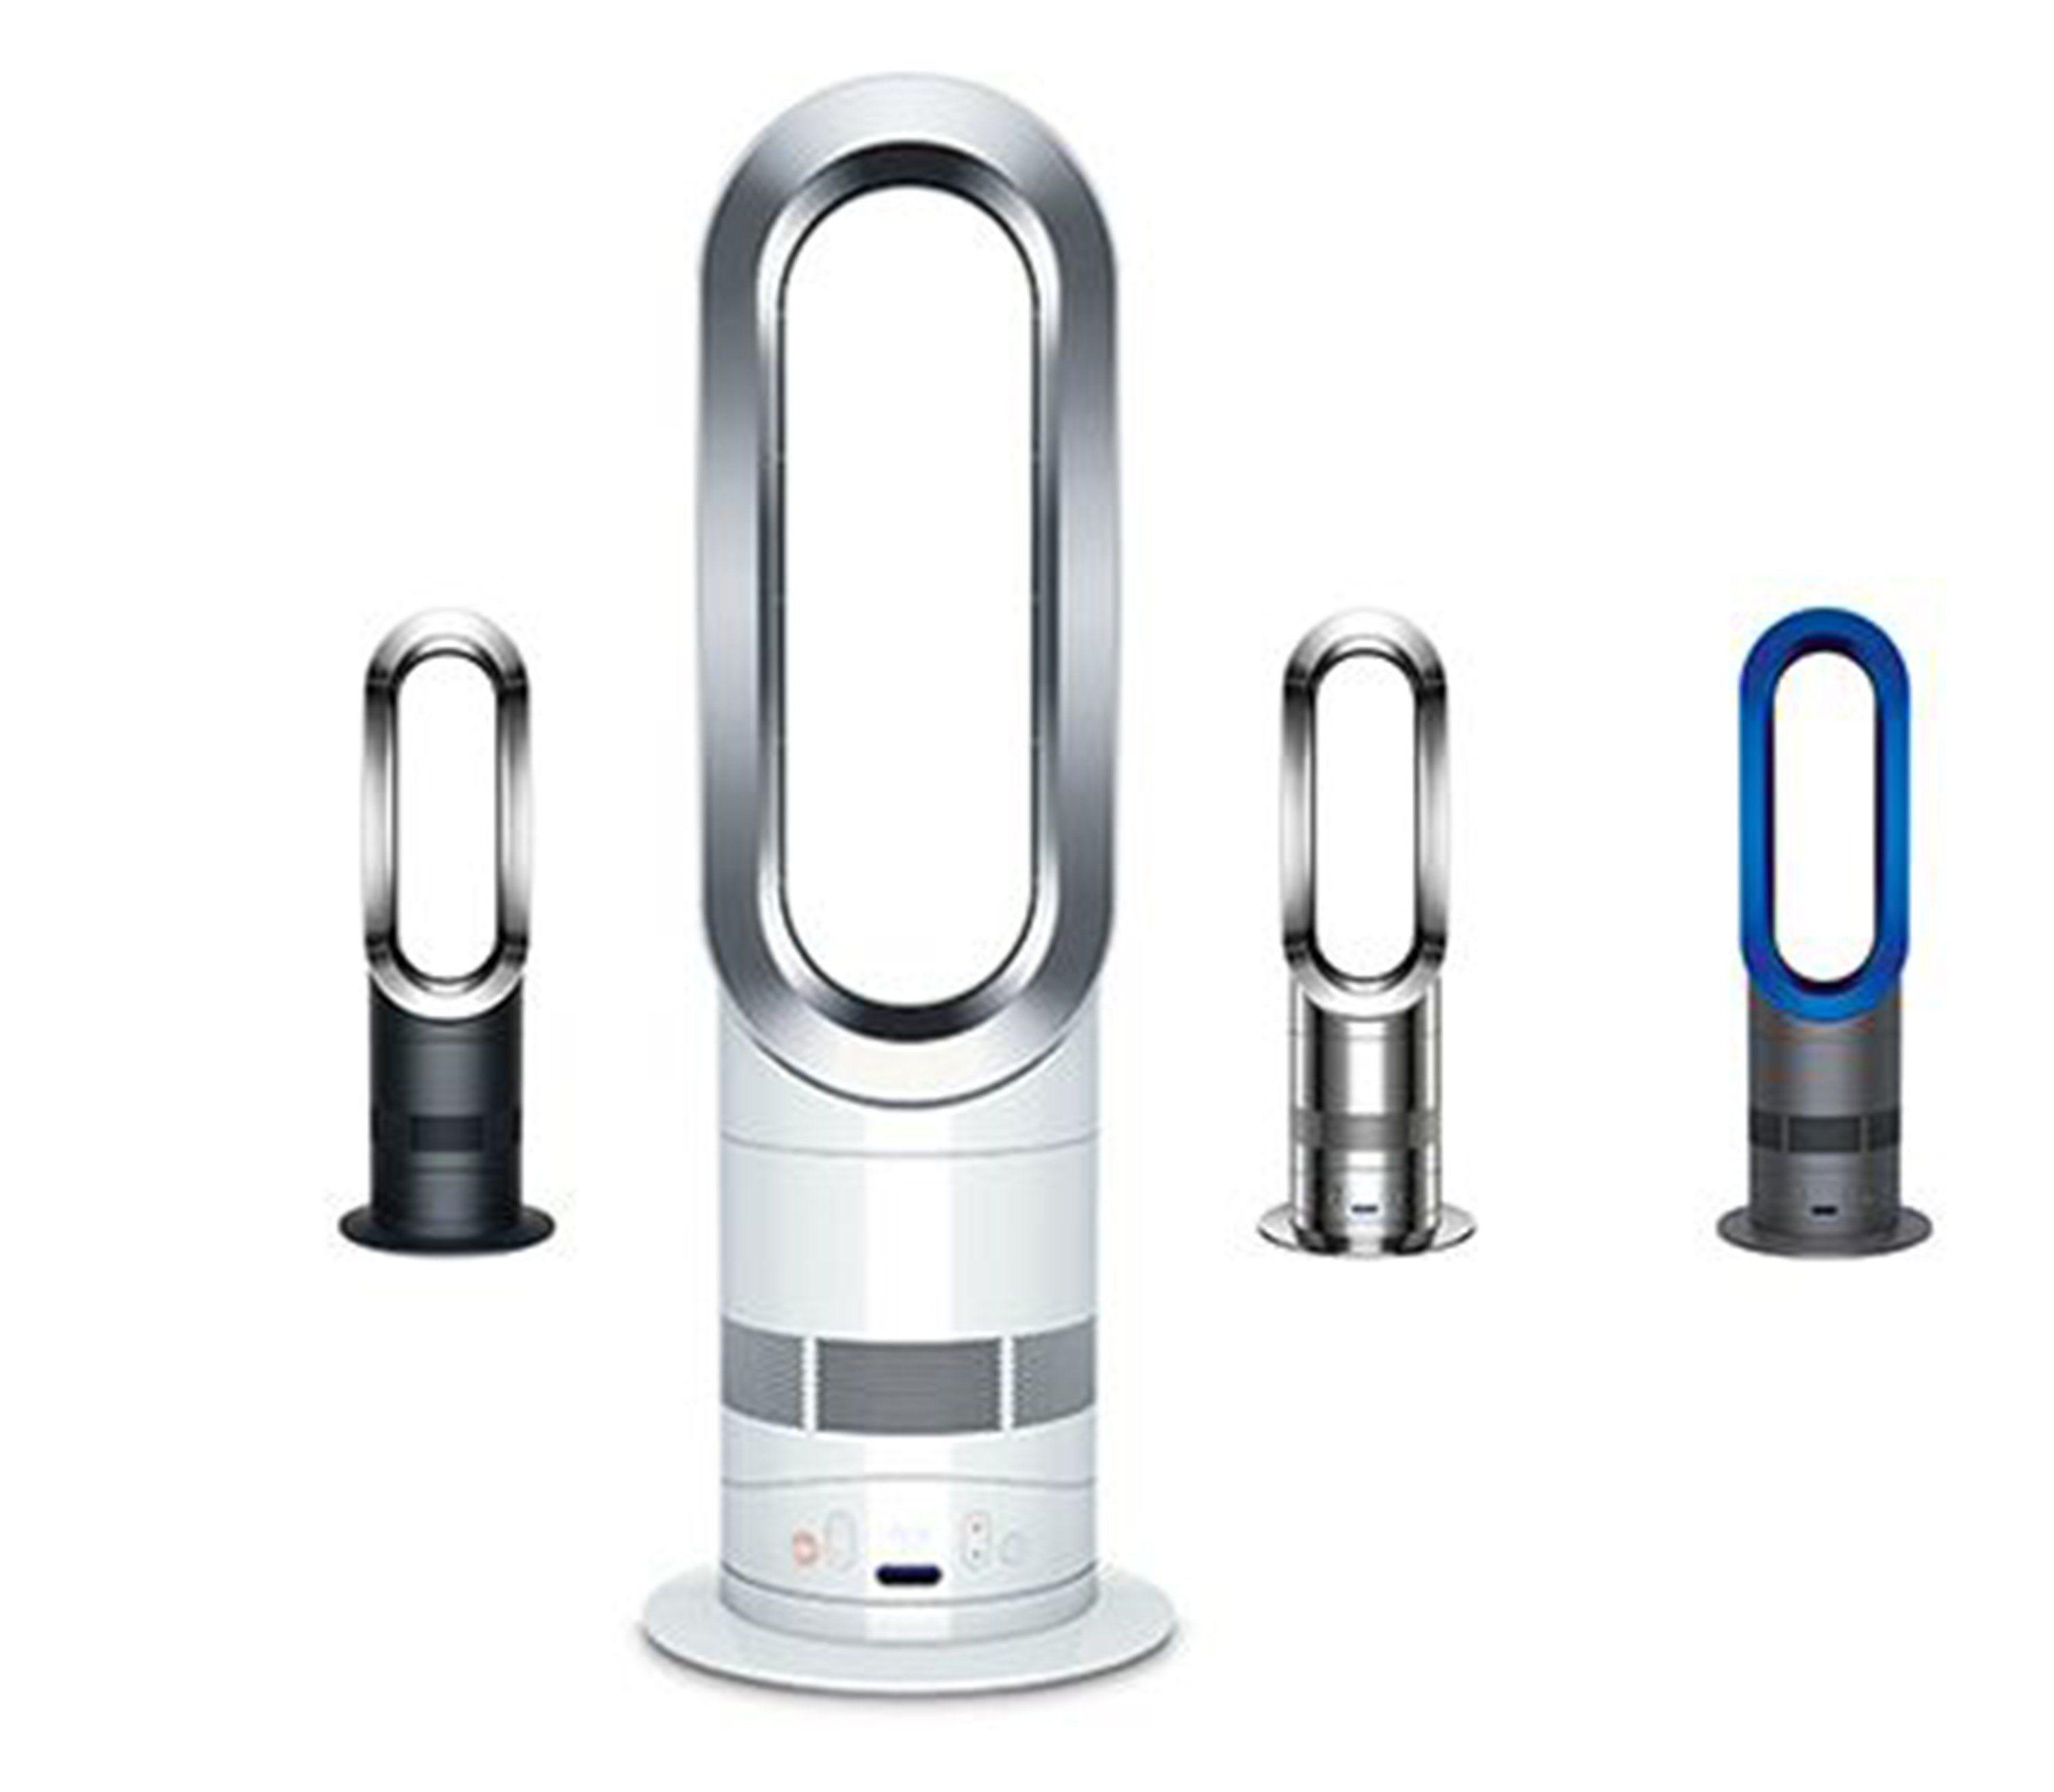 Tech review: Dyson fan keeps you cool (or warm) with style